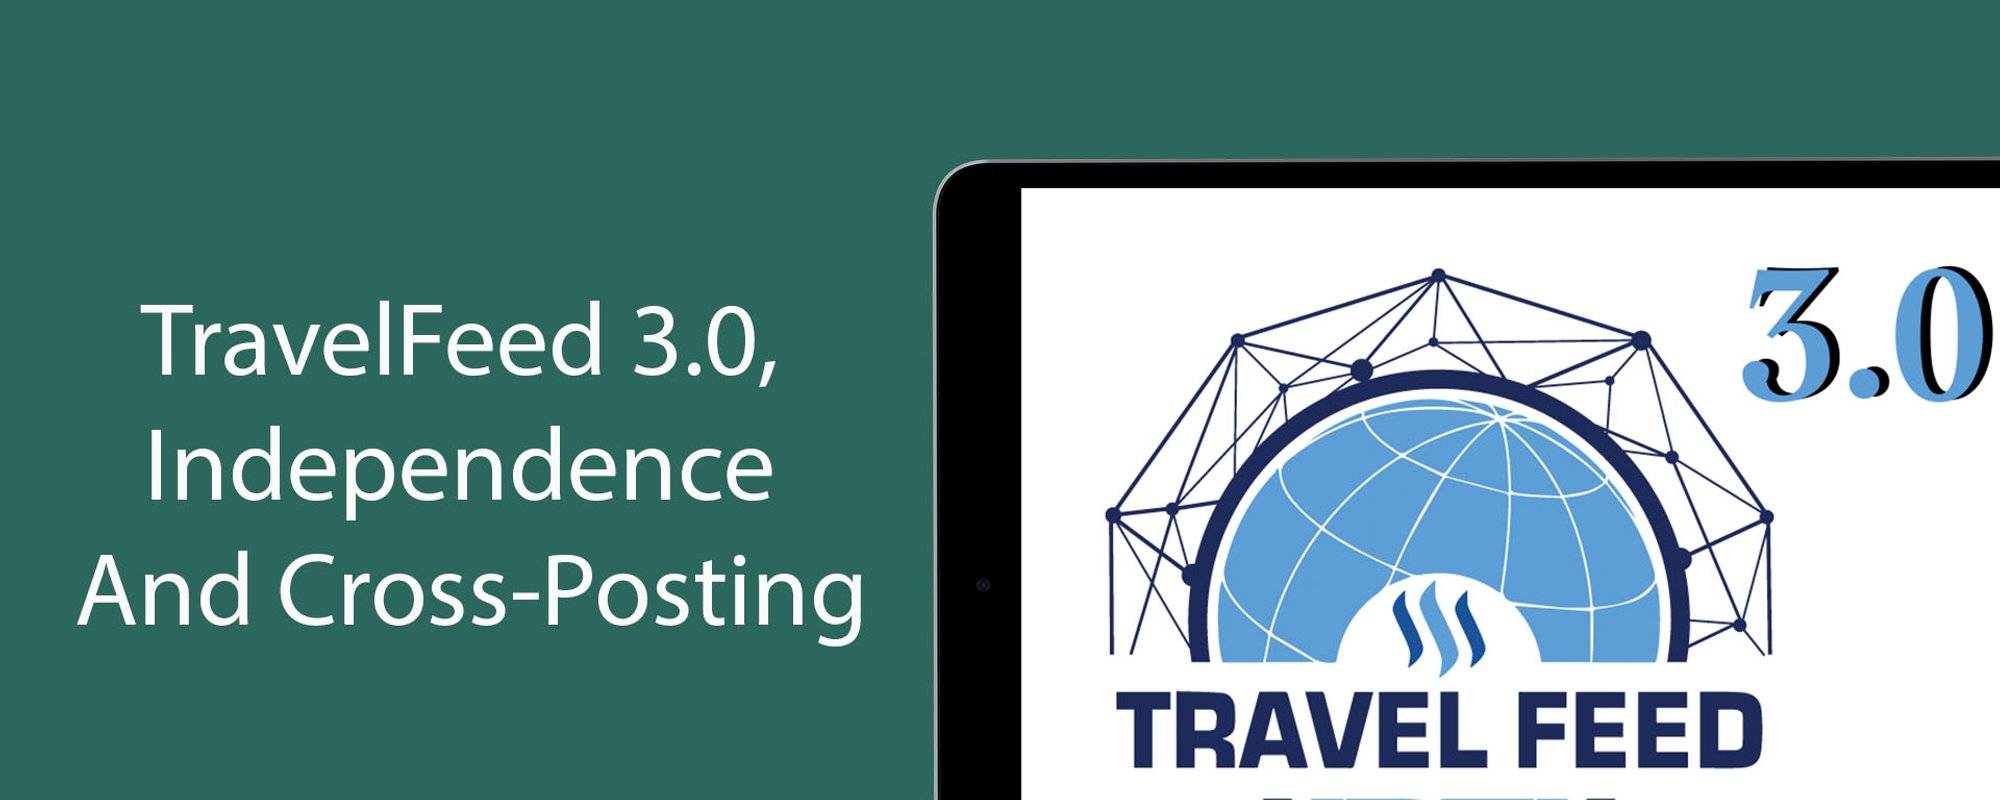 TravelFeed 3.0, Independence And Cross-Posting